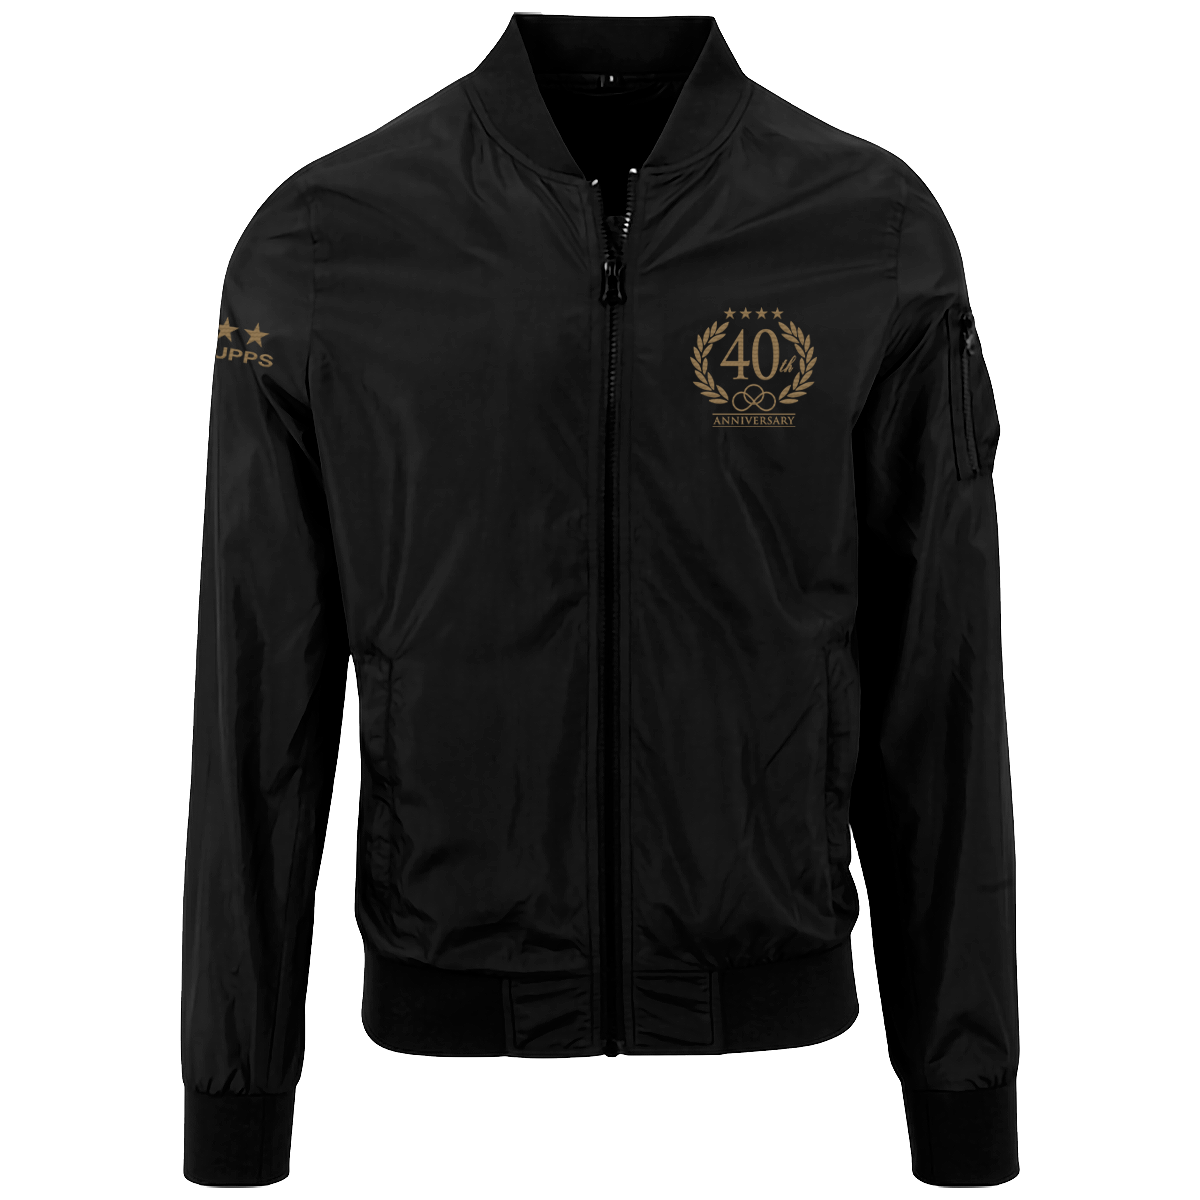 Die Krupps - 40 Years Gold Edition - Nylon Bomber Jacket Embroidered